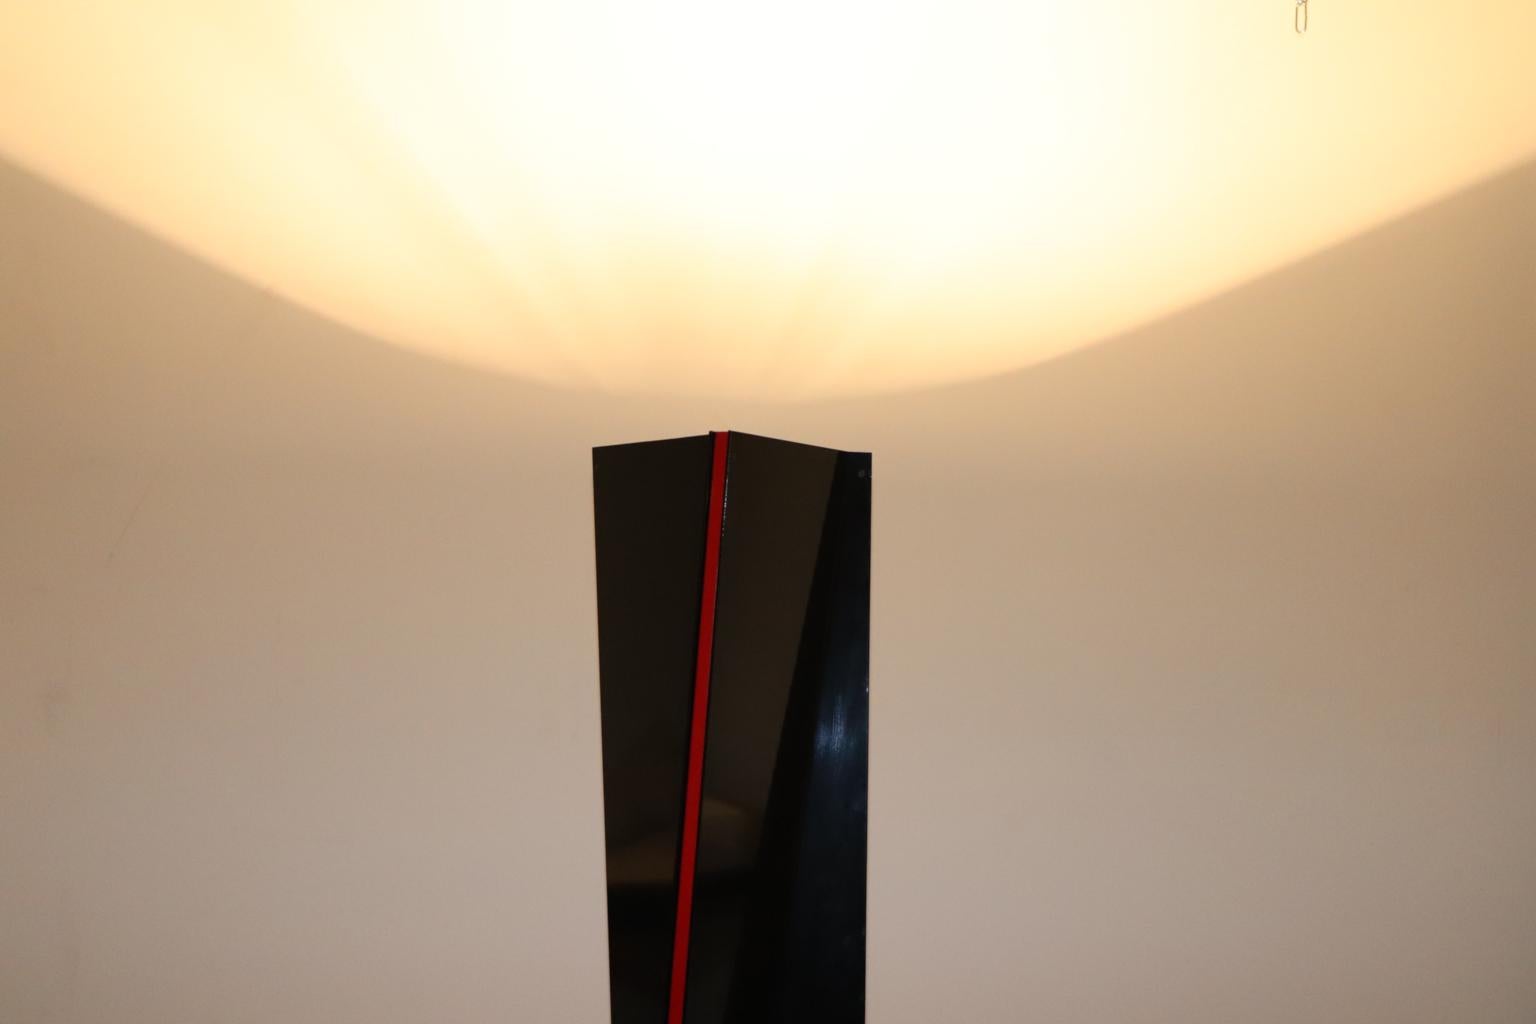 Lacquered Mauro Marzollo Sculptured Floor Lamp Black with Red Stripes Details For Sale